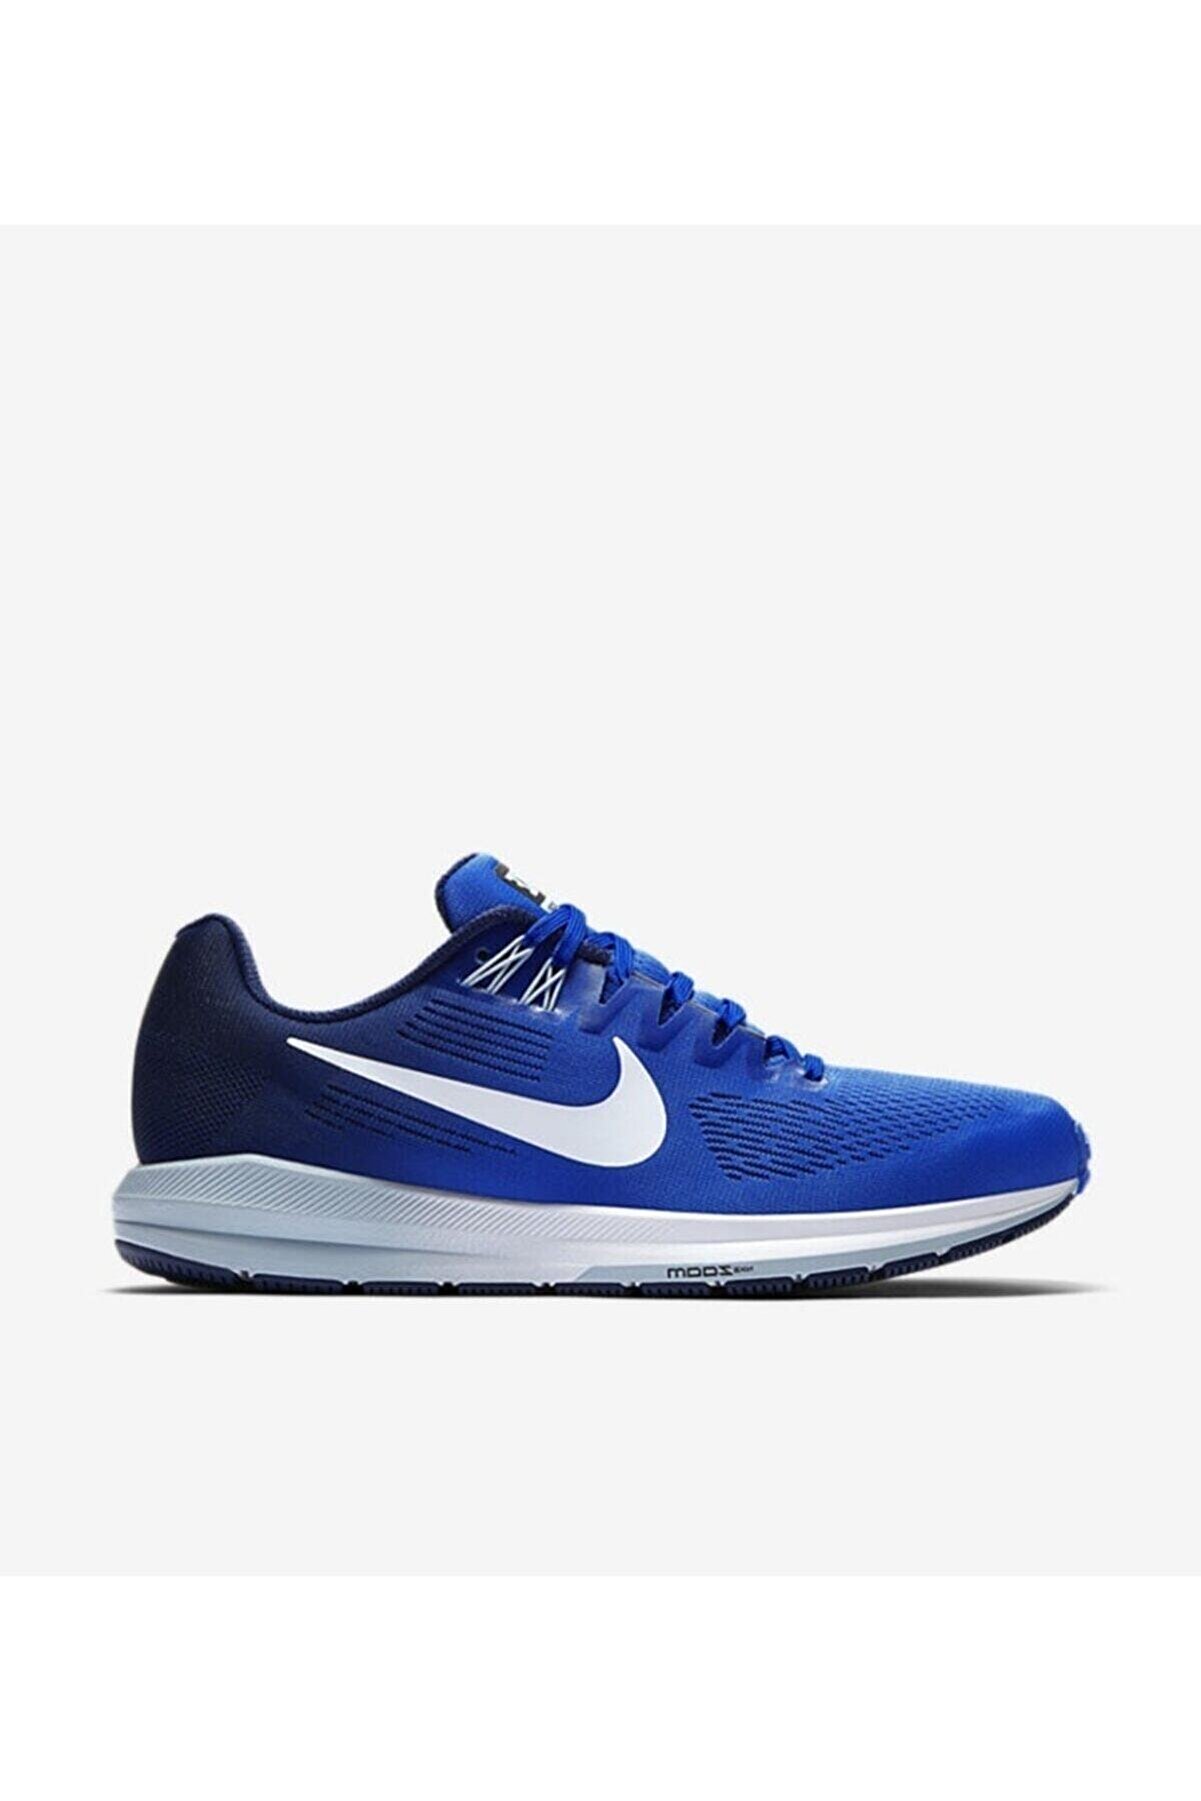 Nike Air Zoom Structure 21 904695-402